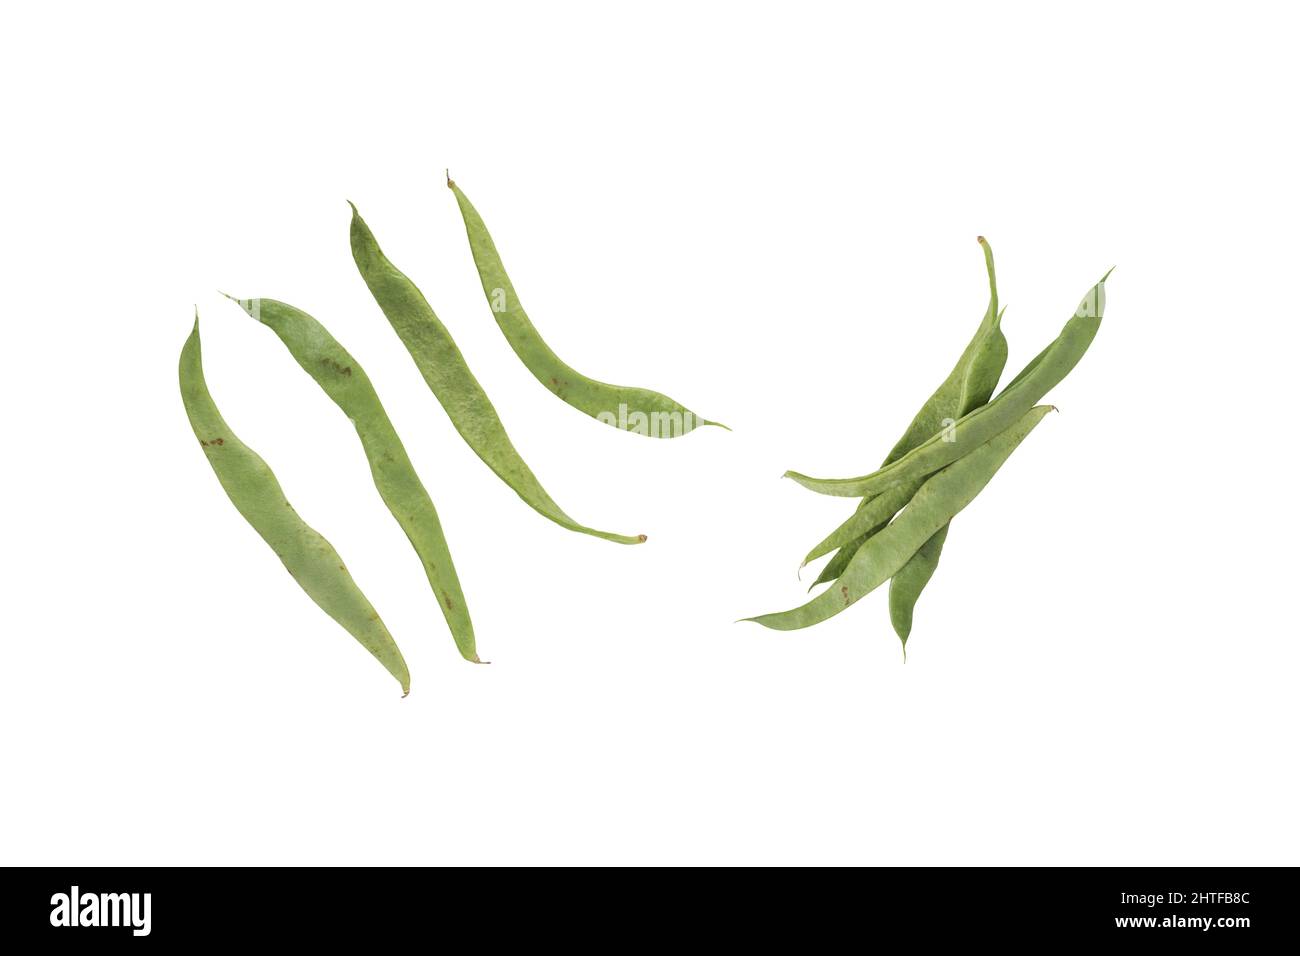 Green bean vegetable isolated Stock Photo